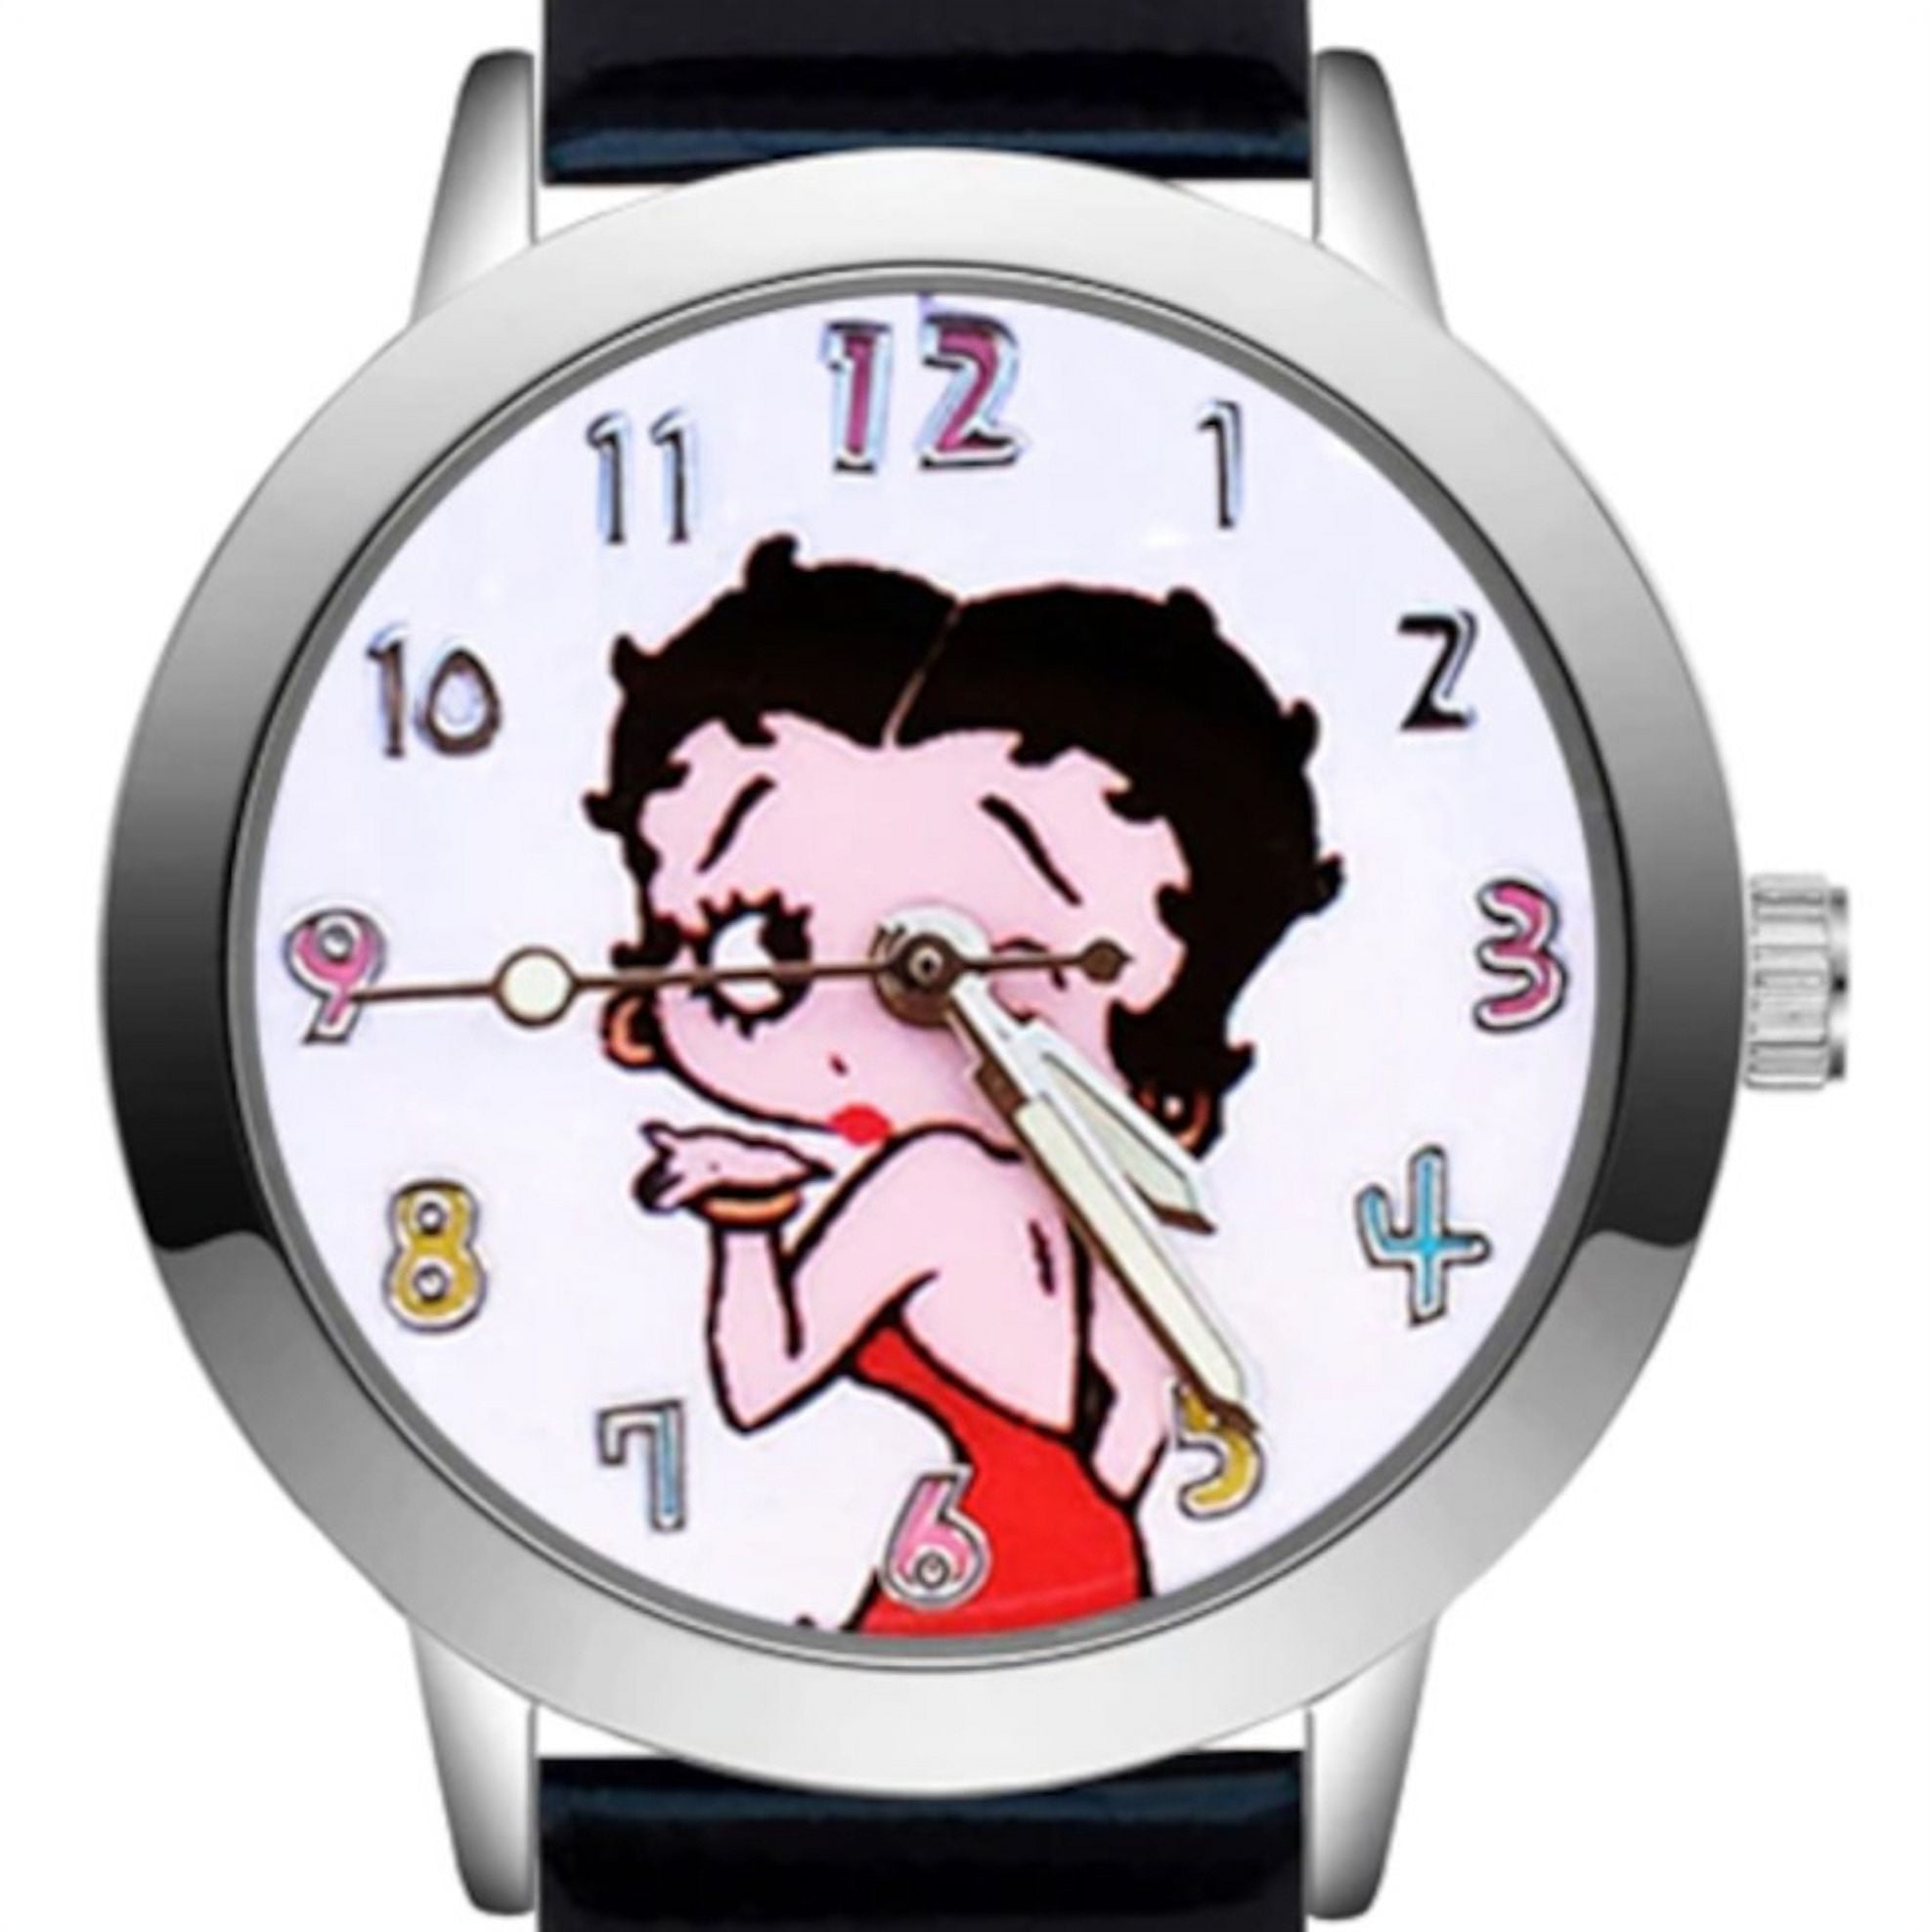 Betty Boop Watch With Glow in the Dark Hands Watch -401-A